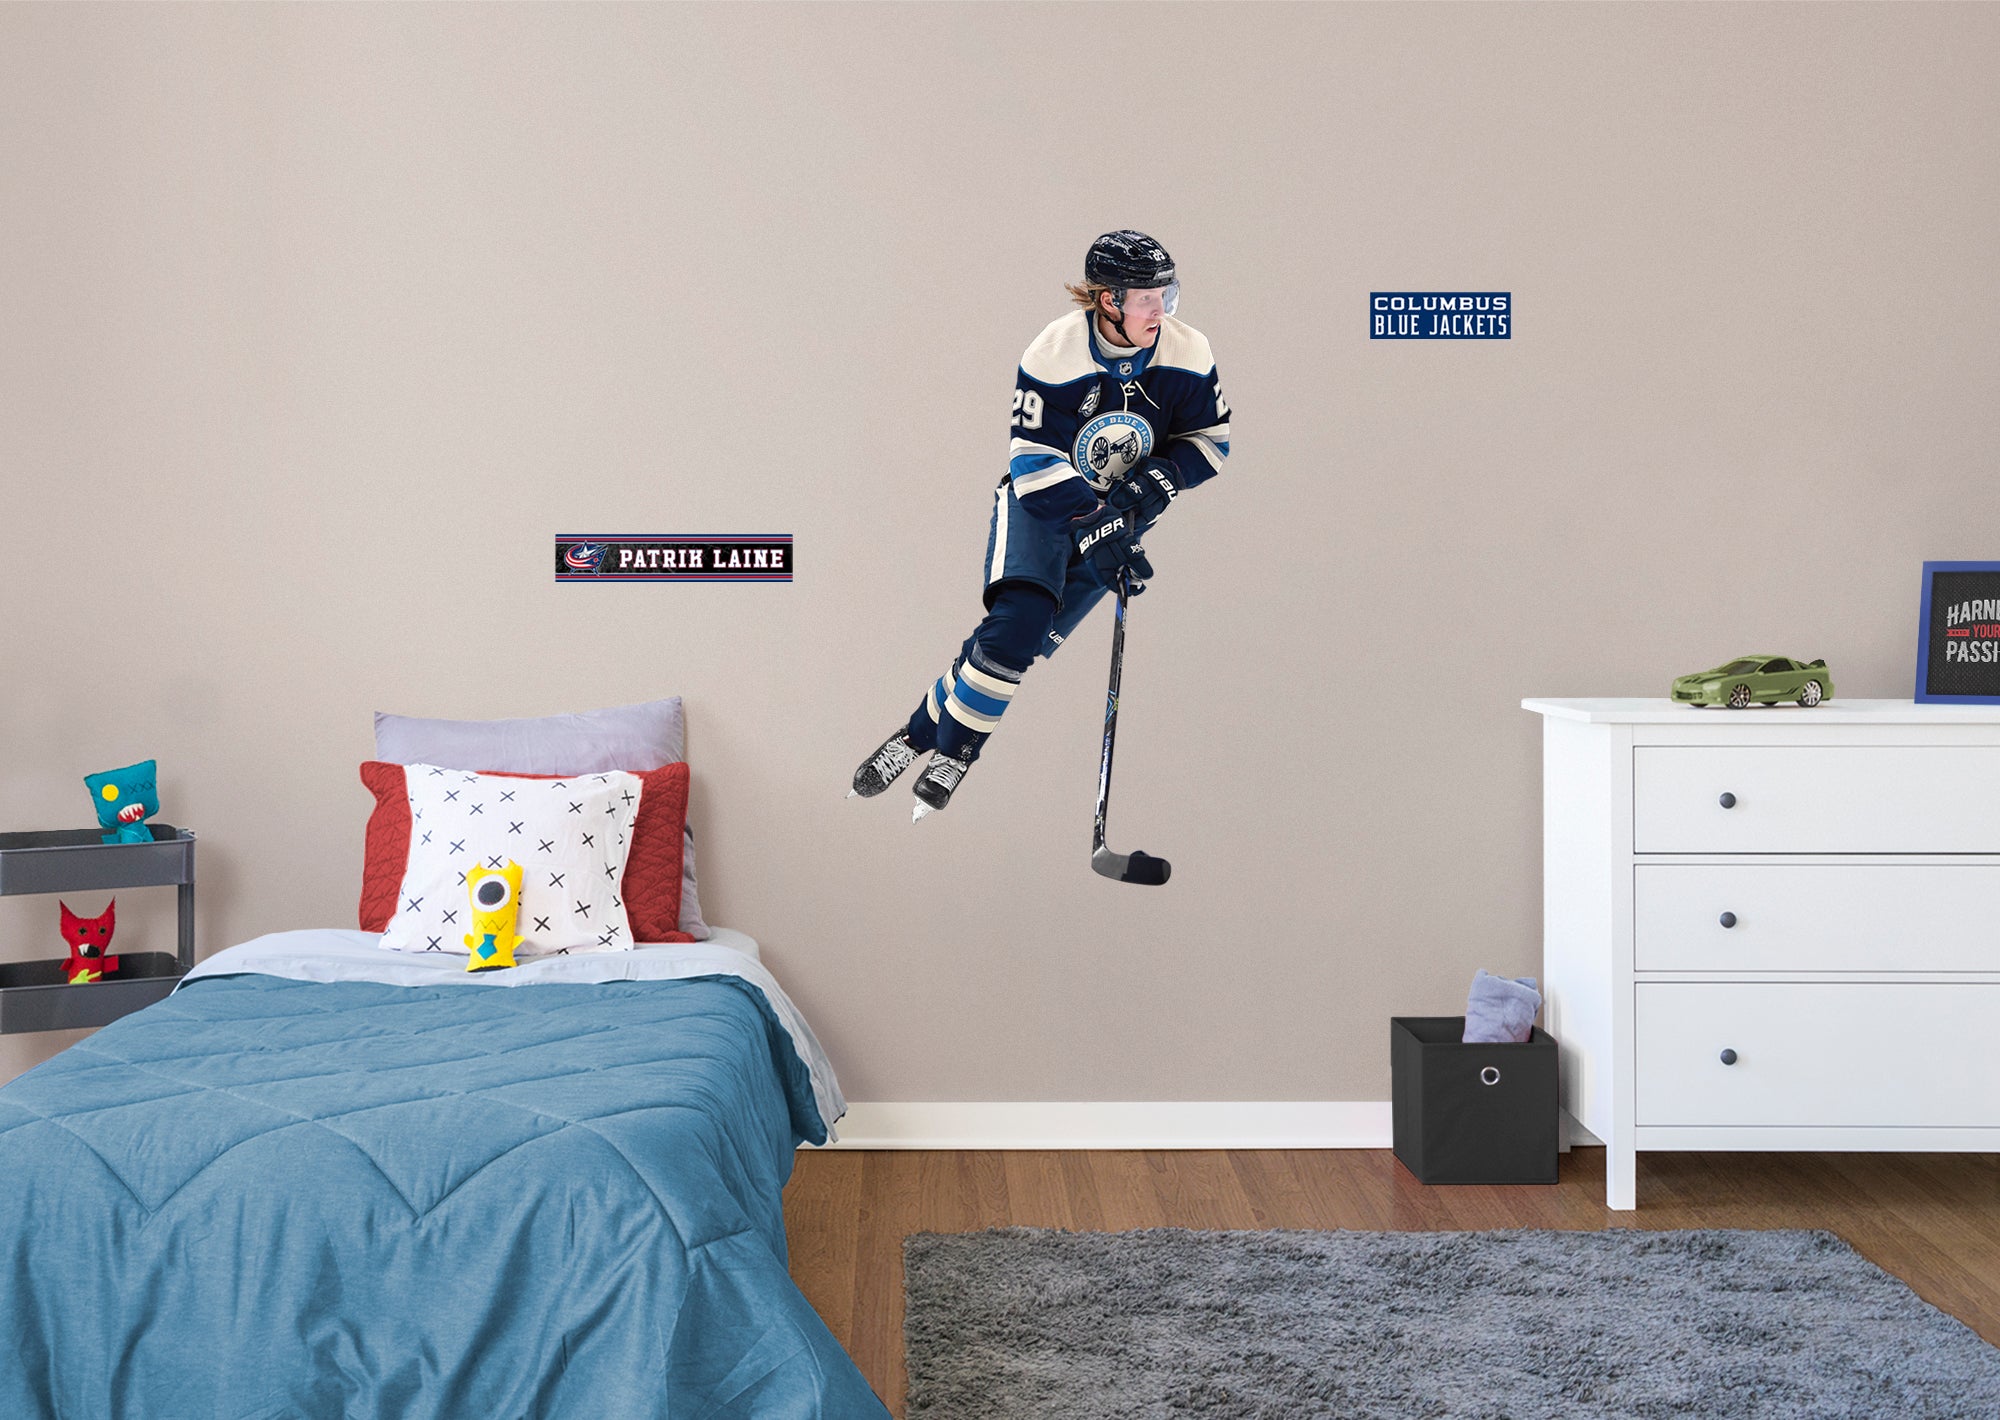 Patrik Laine 2021 for Columbus Blue Jackets - Officially Licensed NHL Removable Wall Decal Giant Athlete + 2 Decals by Fathead |